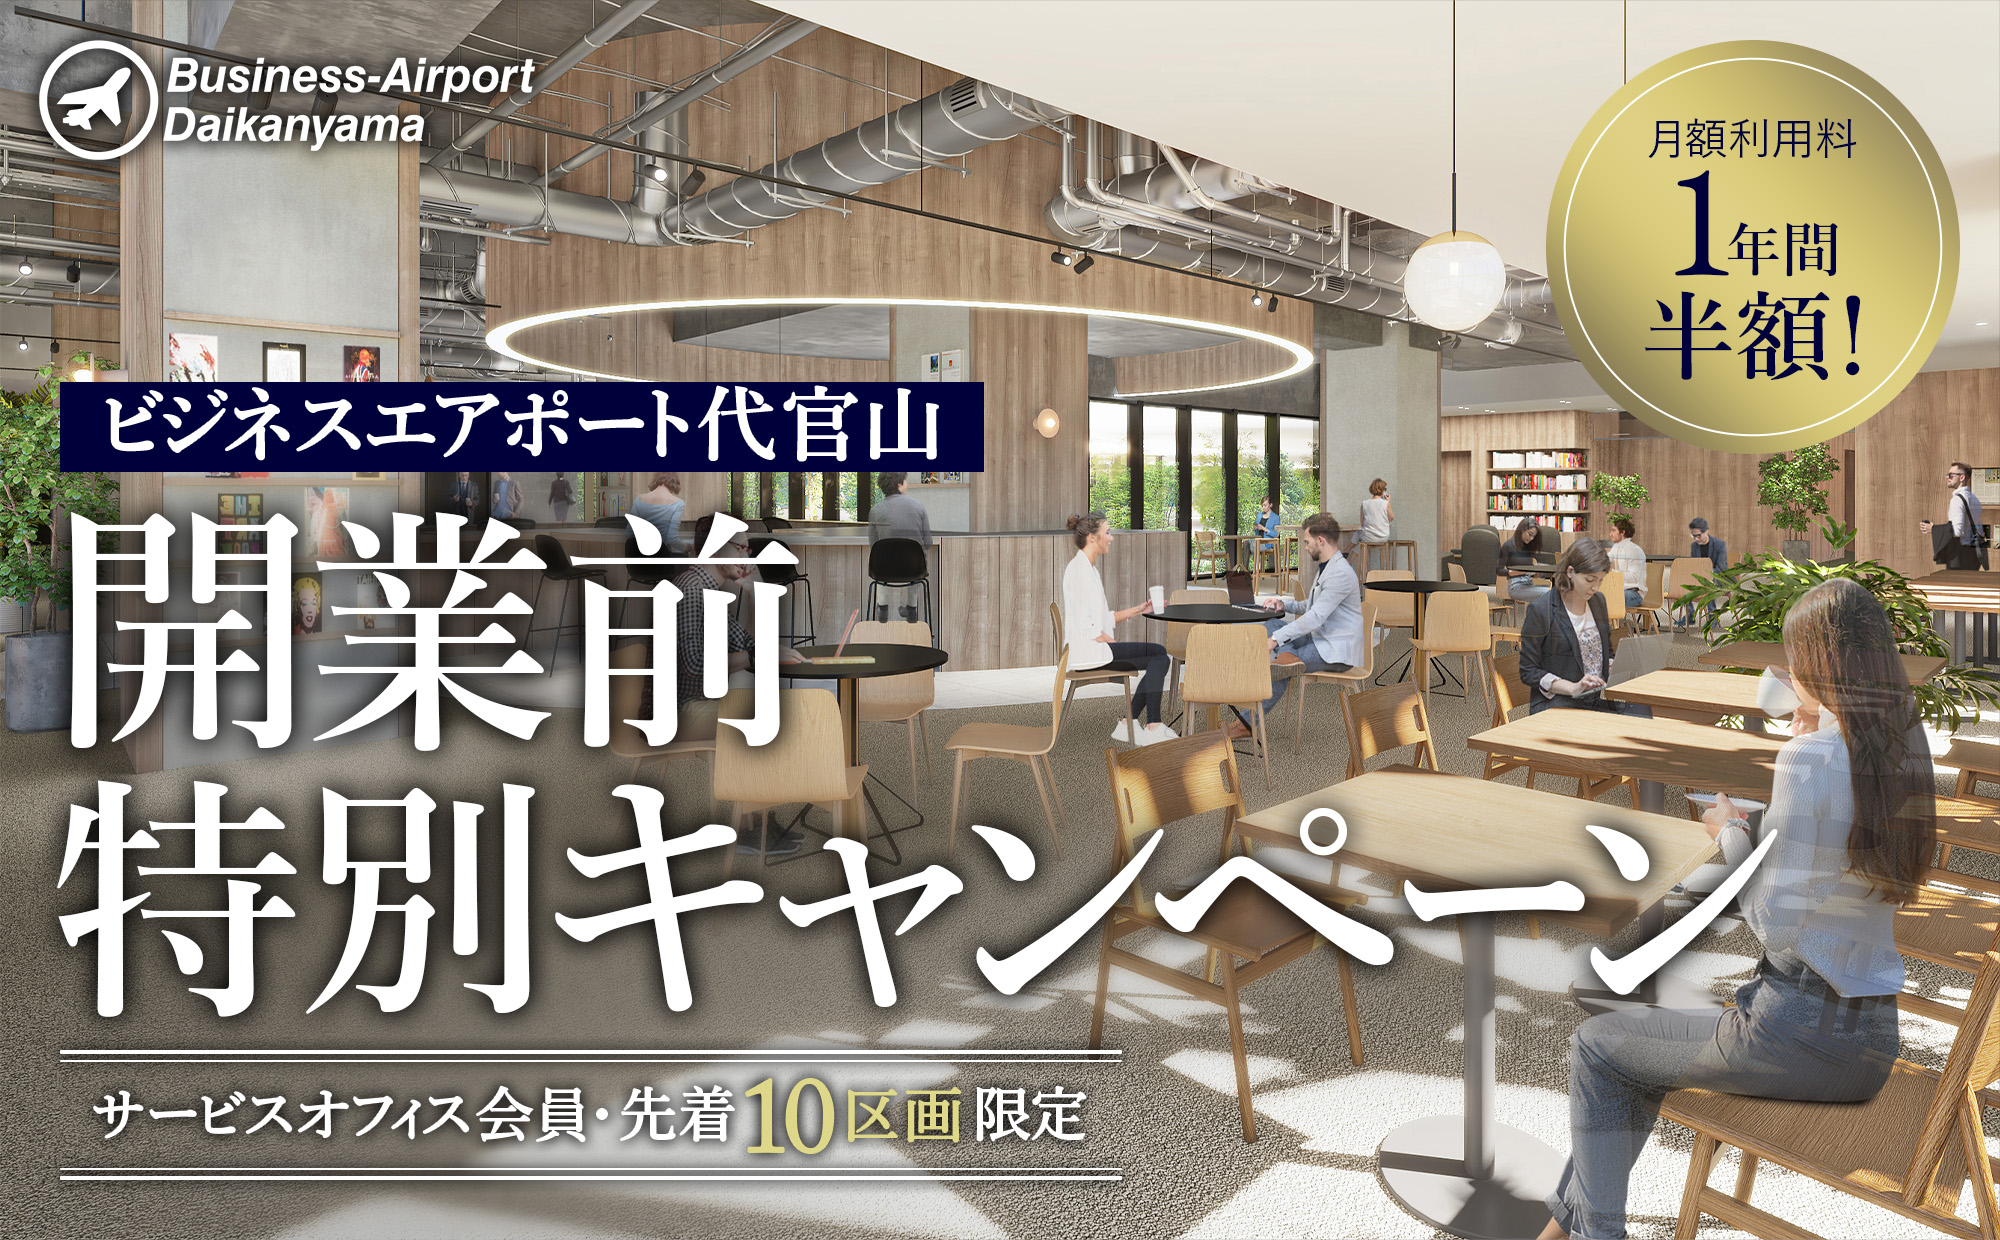 Business-Airport 代官山